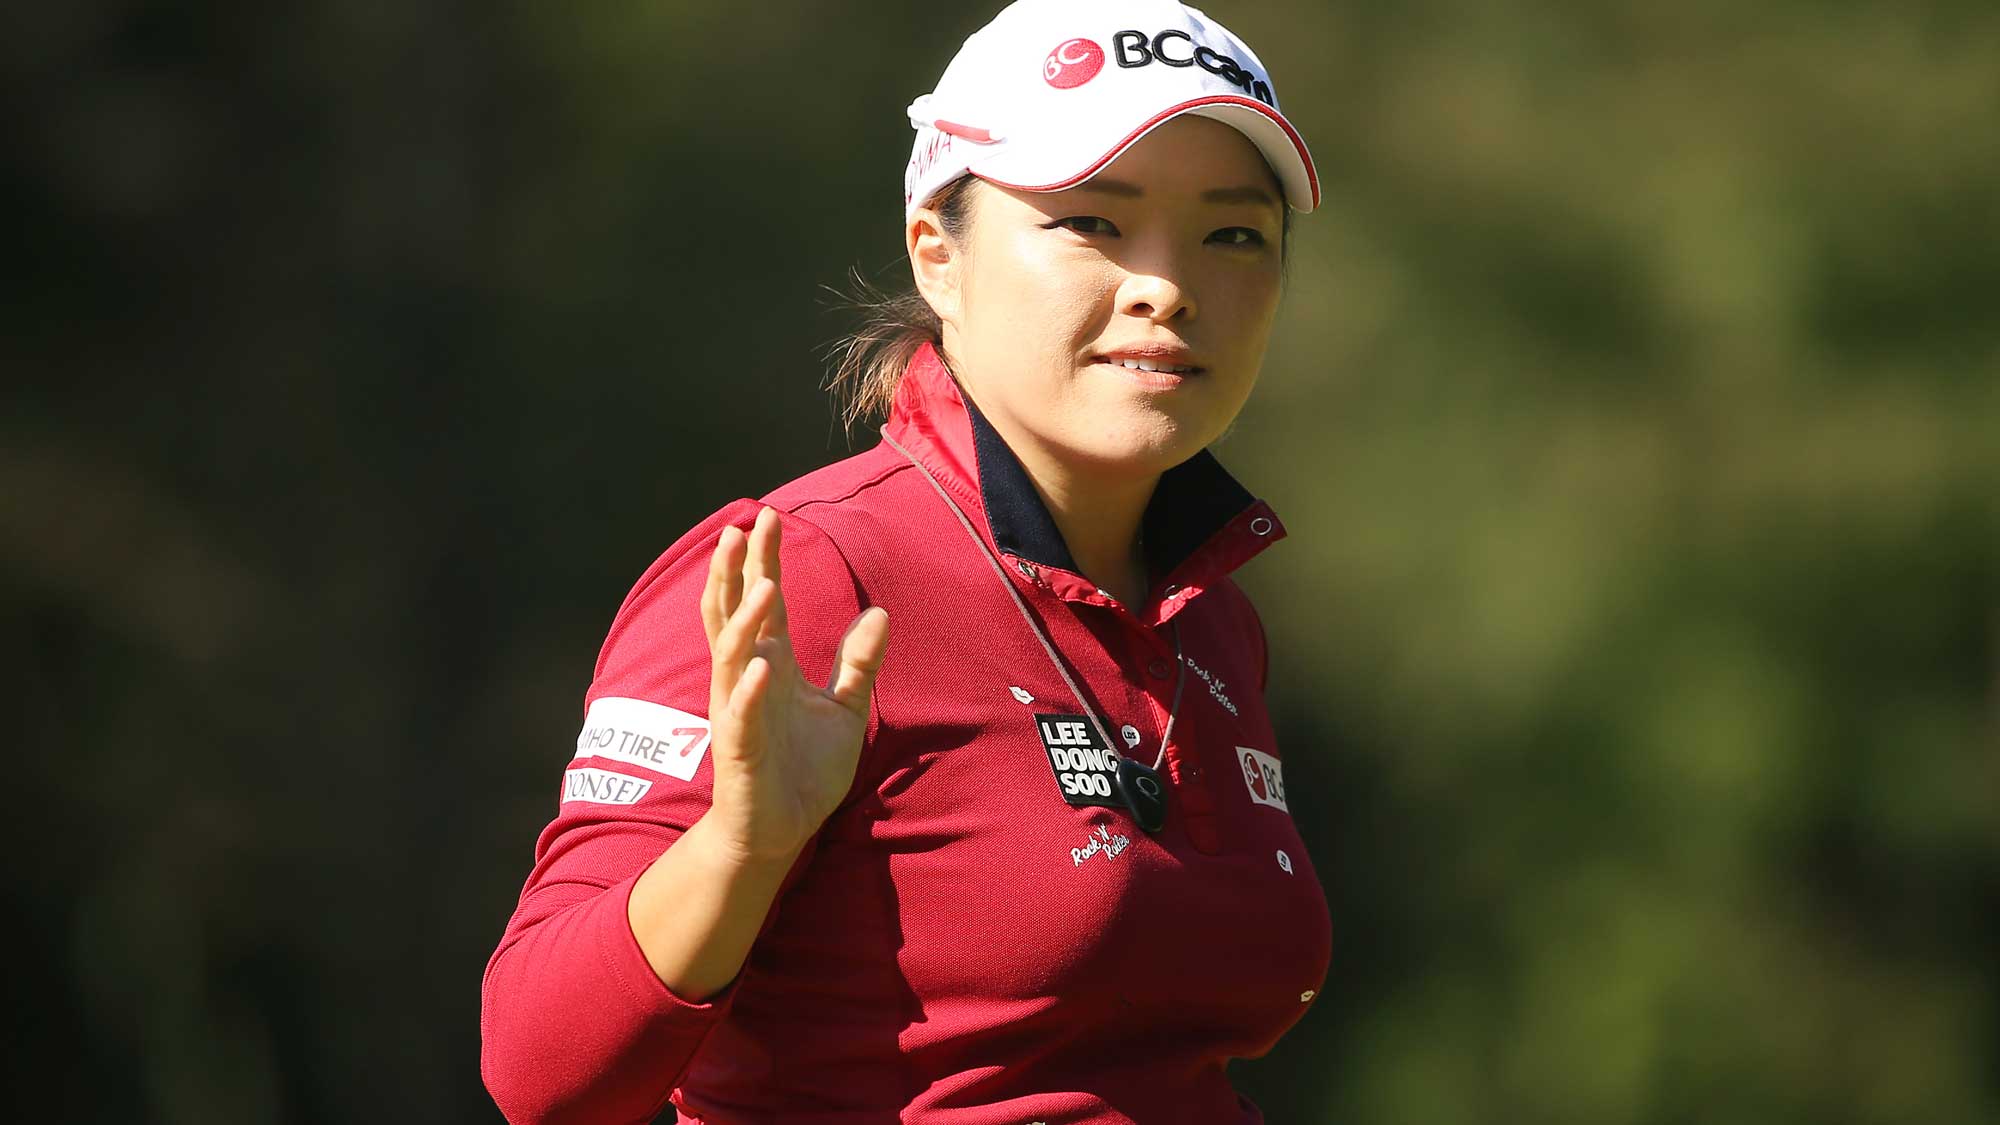 Ha Na Jang of South Korea celebrates after making her birdie putt on the 7th hole during the second round of the TOTO Japan Classic